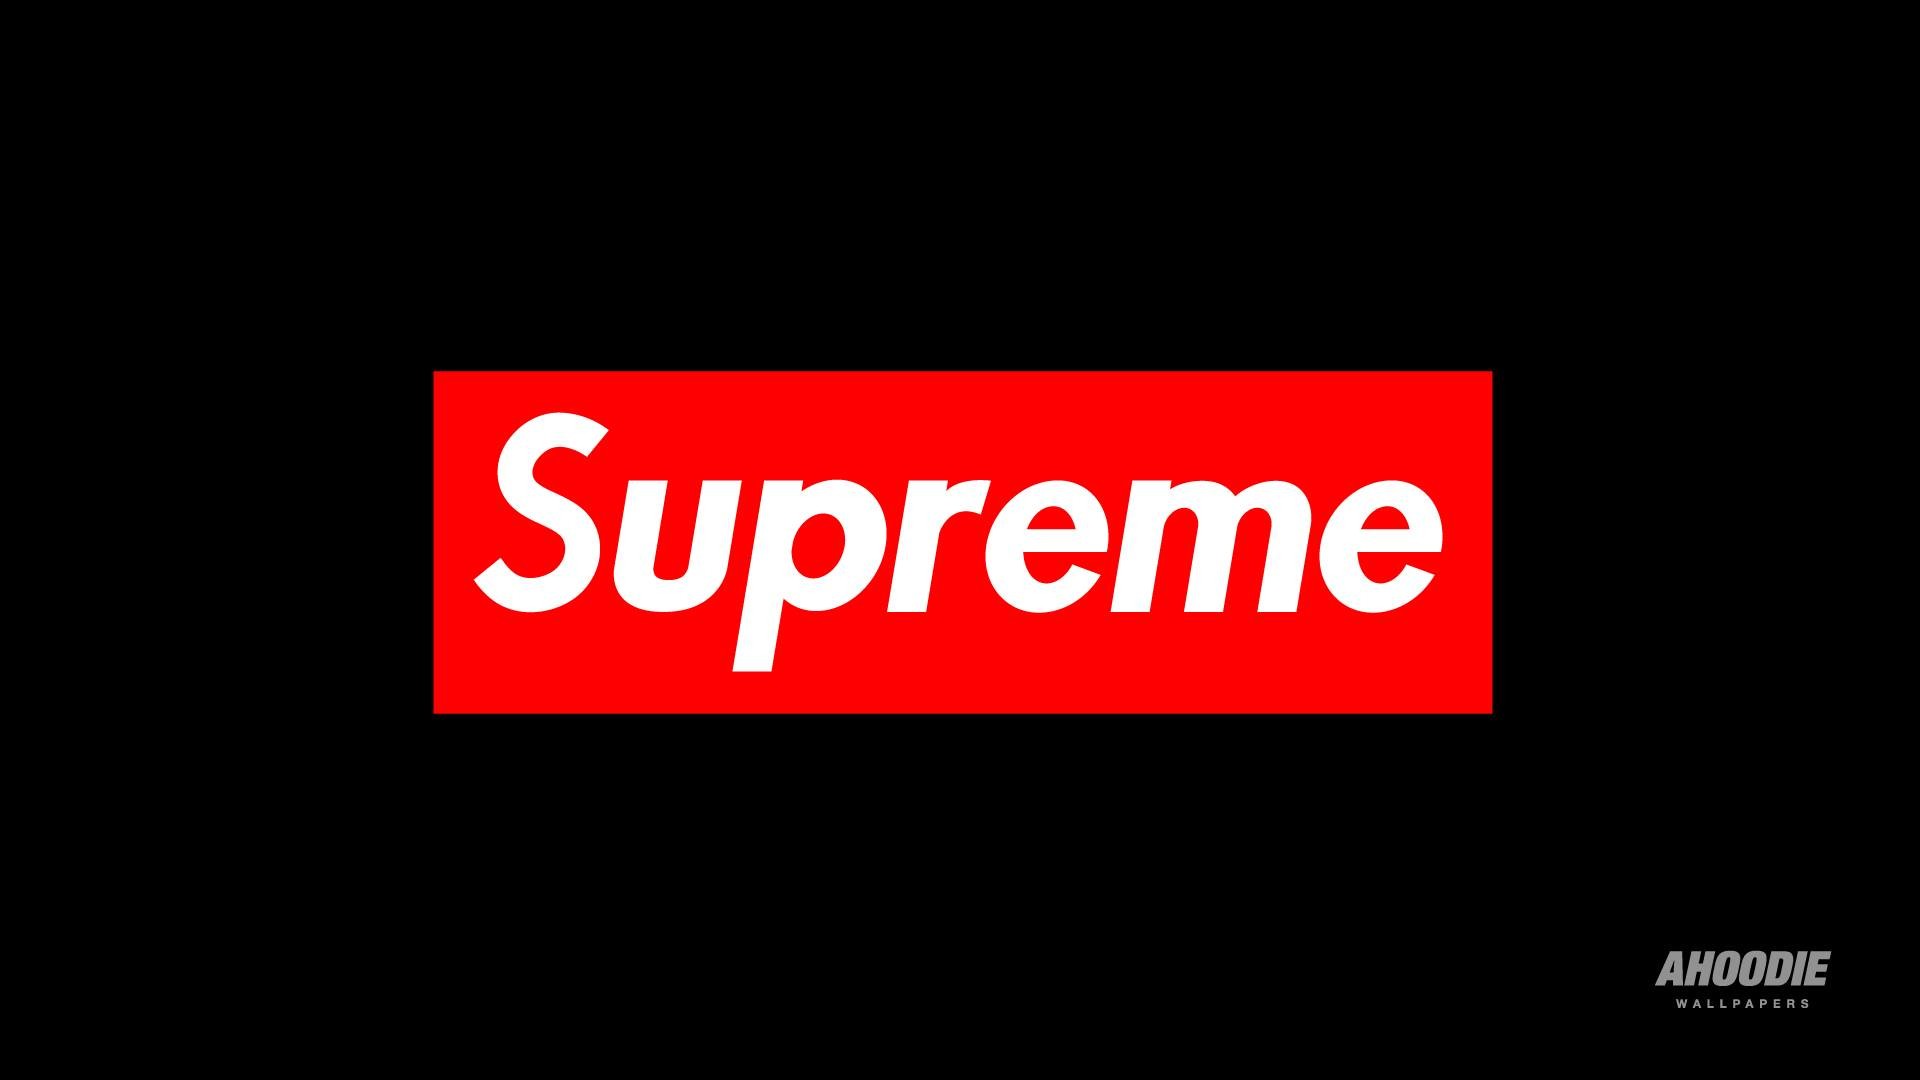 1920x1080 Supreme Wallpaper - HD Wallpapers Backgrounds of Your Choice